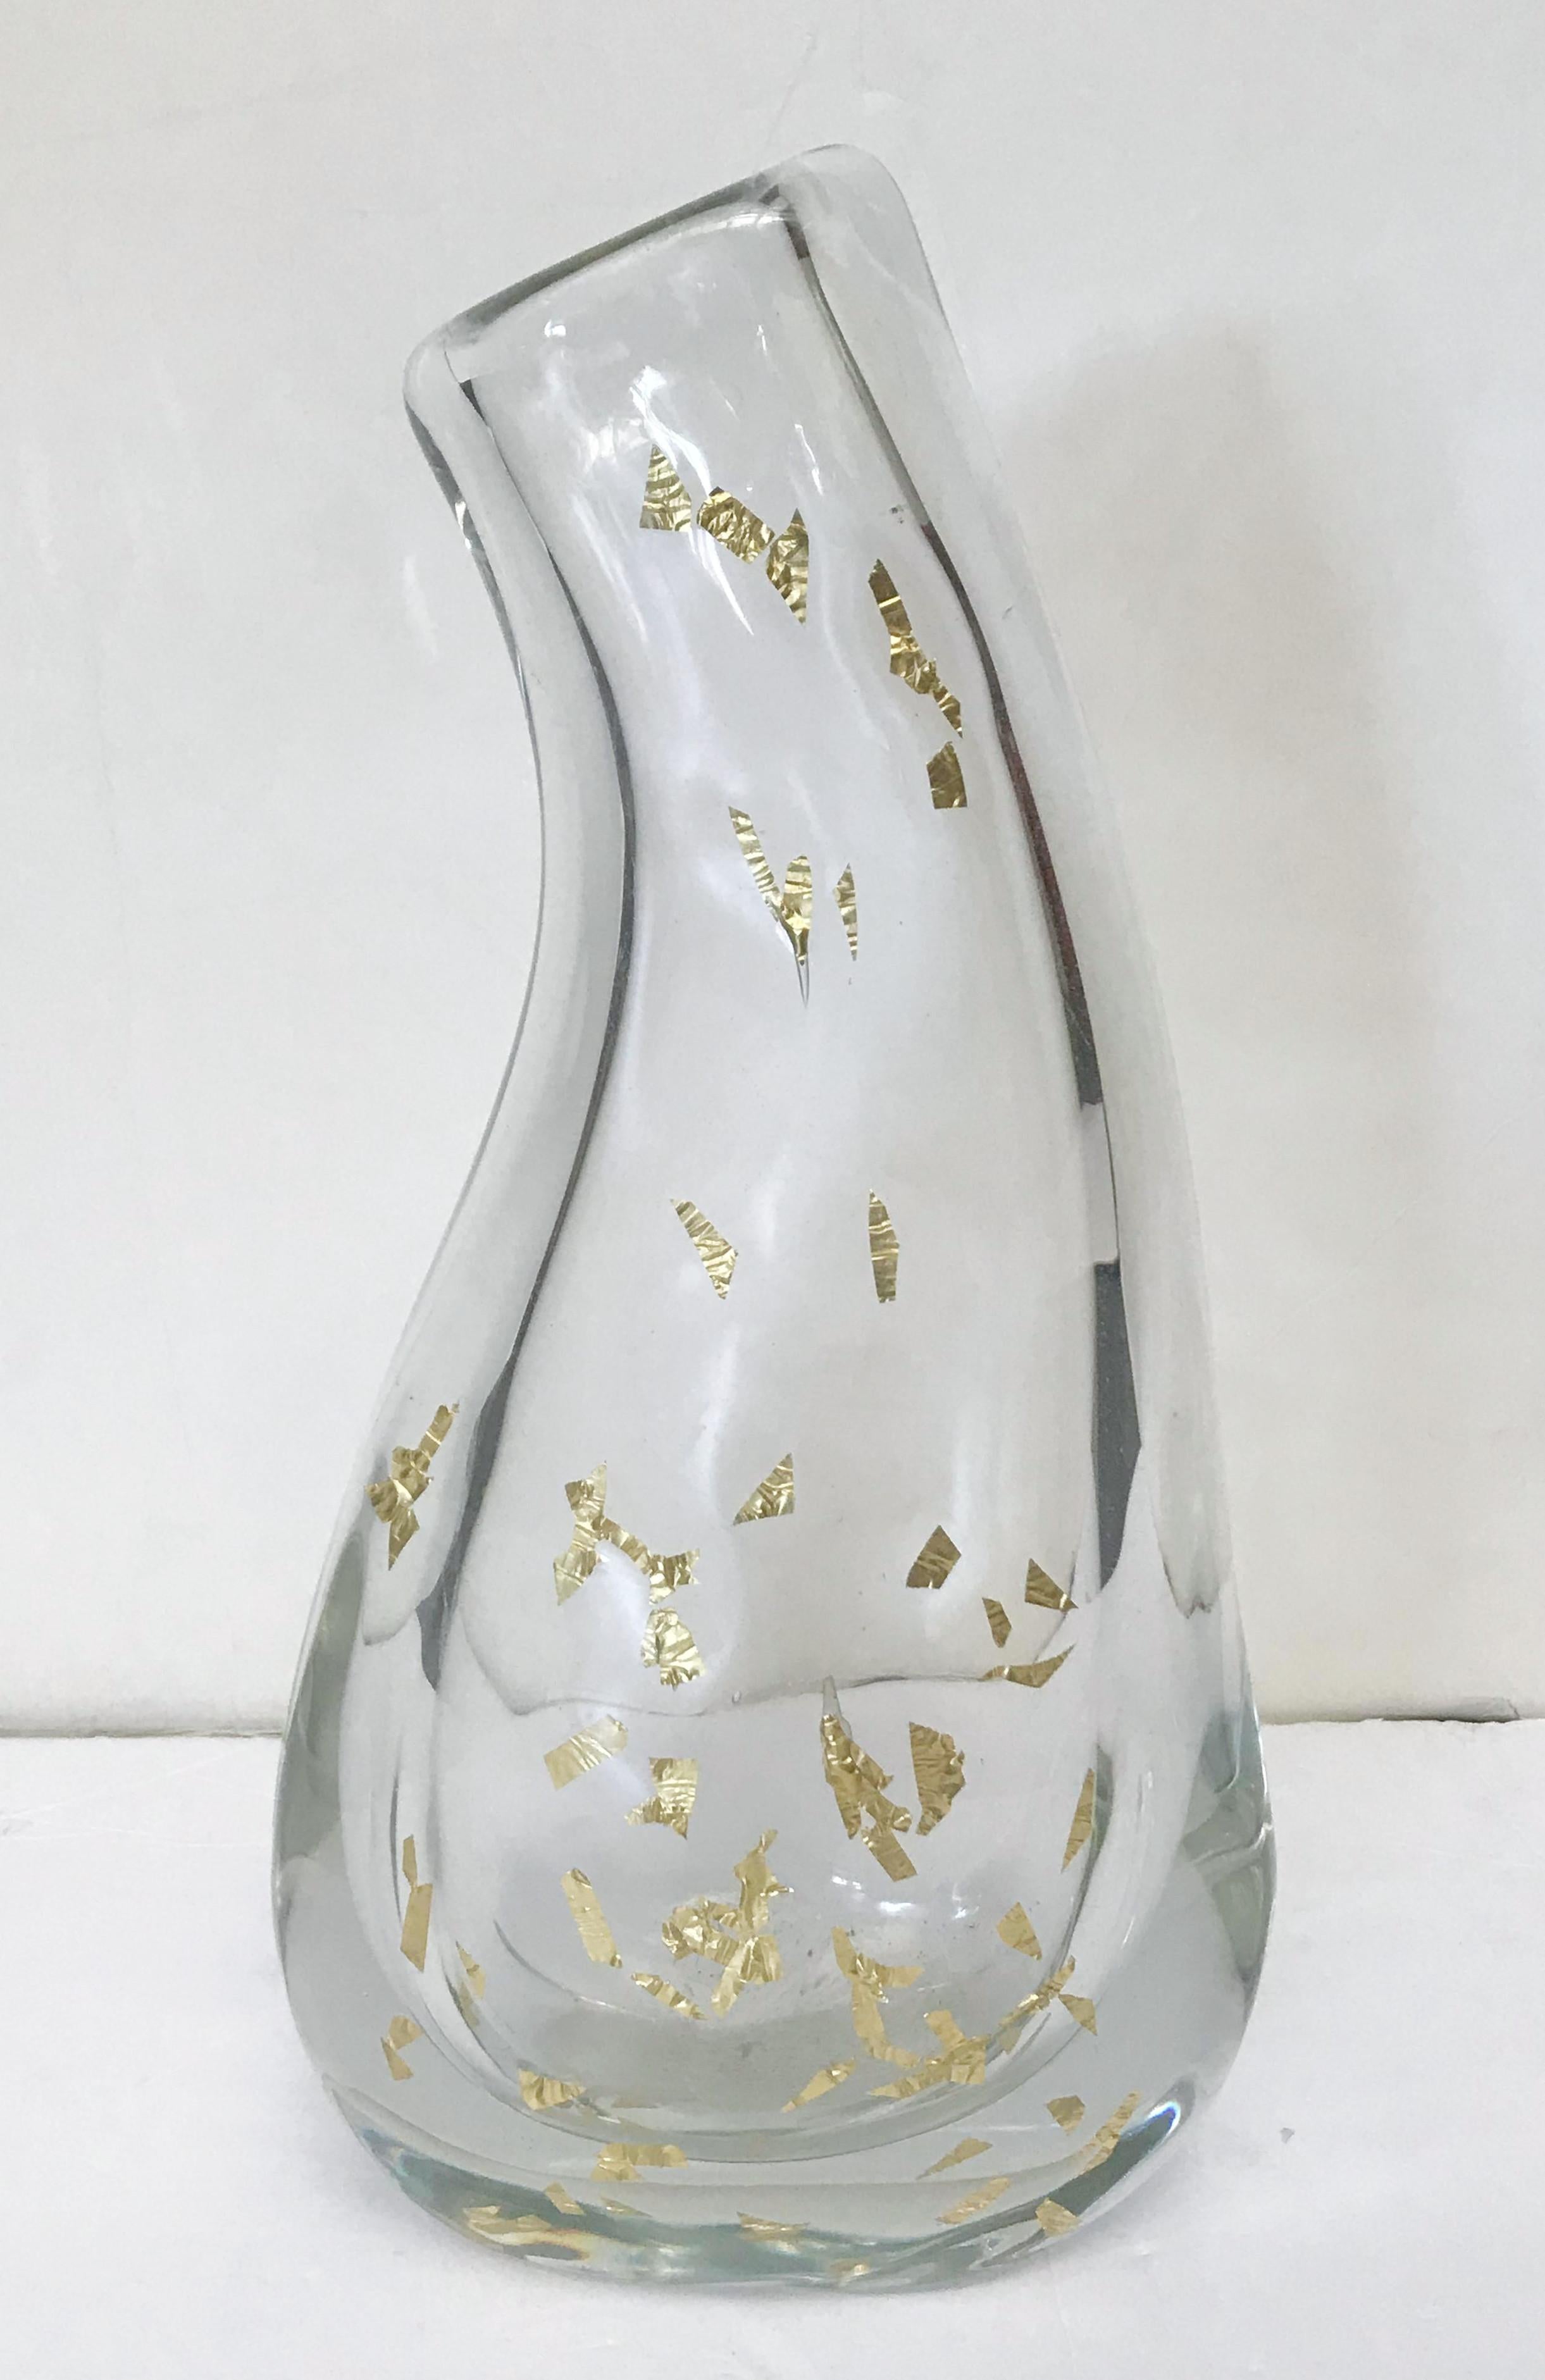 Italian clear Murano glass vase hand blown with gold flecks within the glass / Made in Italy, circa 1960s
Signed on the base
Measures: Height 16.5 inches, width 8 inches, depth 5 inches 
1 in stock in Palm Springs currently ON 40% OFF SALE for